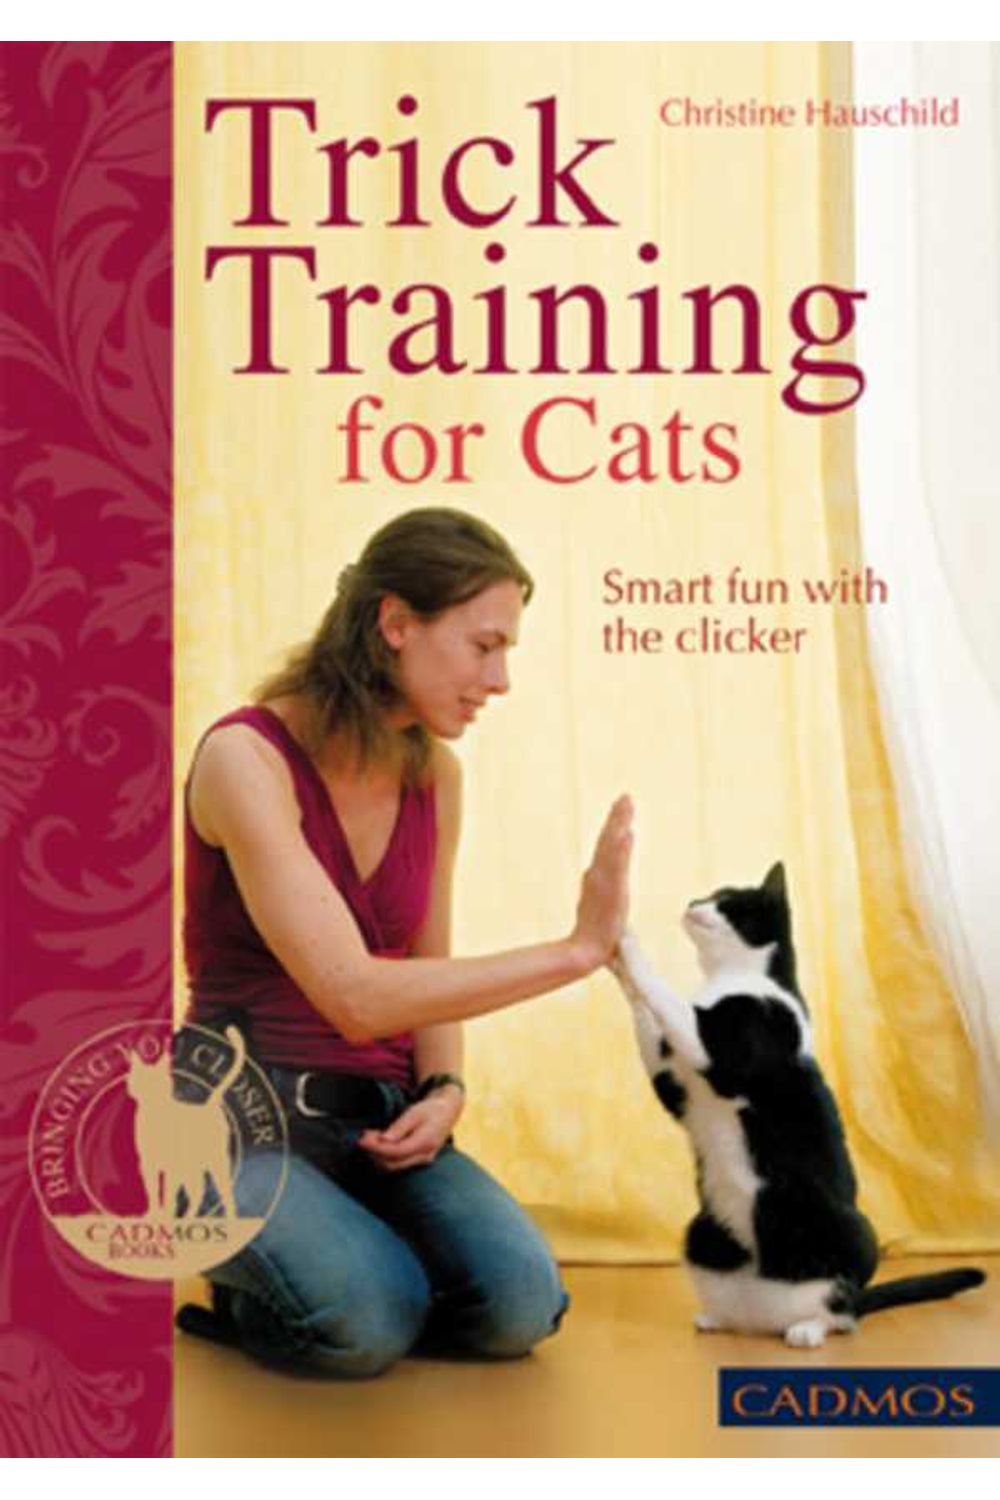 bw-trick-training-for-cats-cadmos-publishing-9780857886163